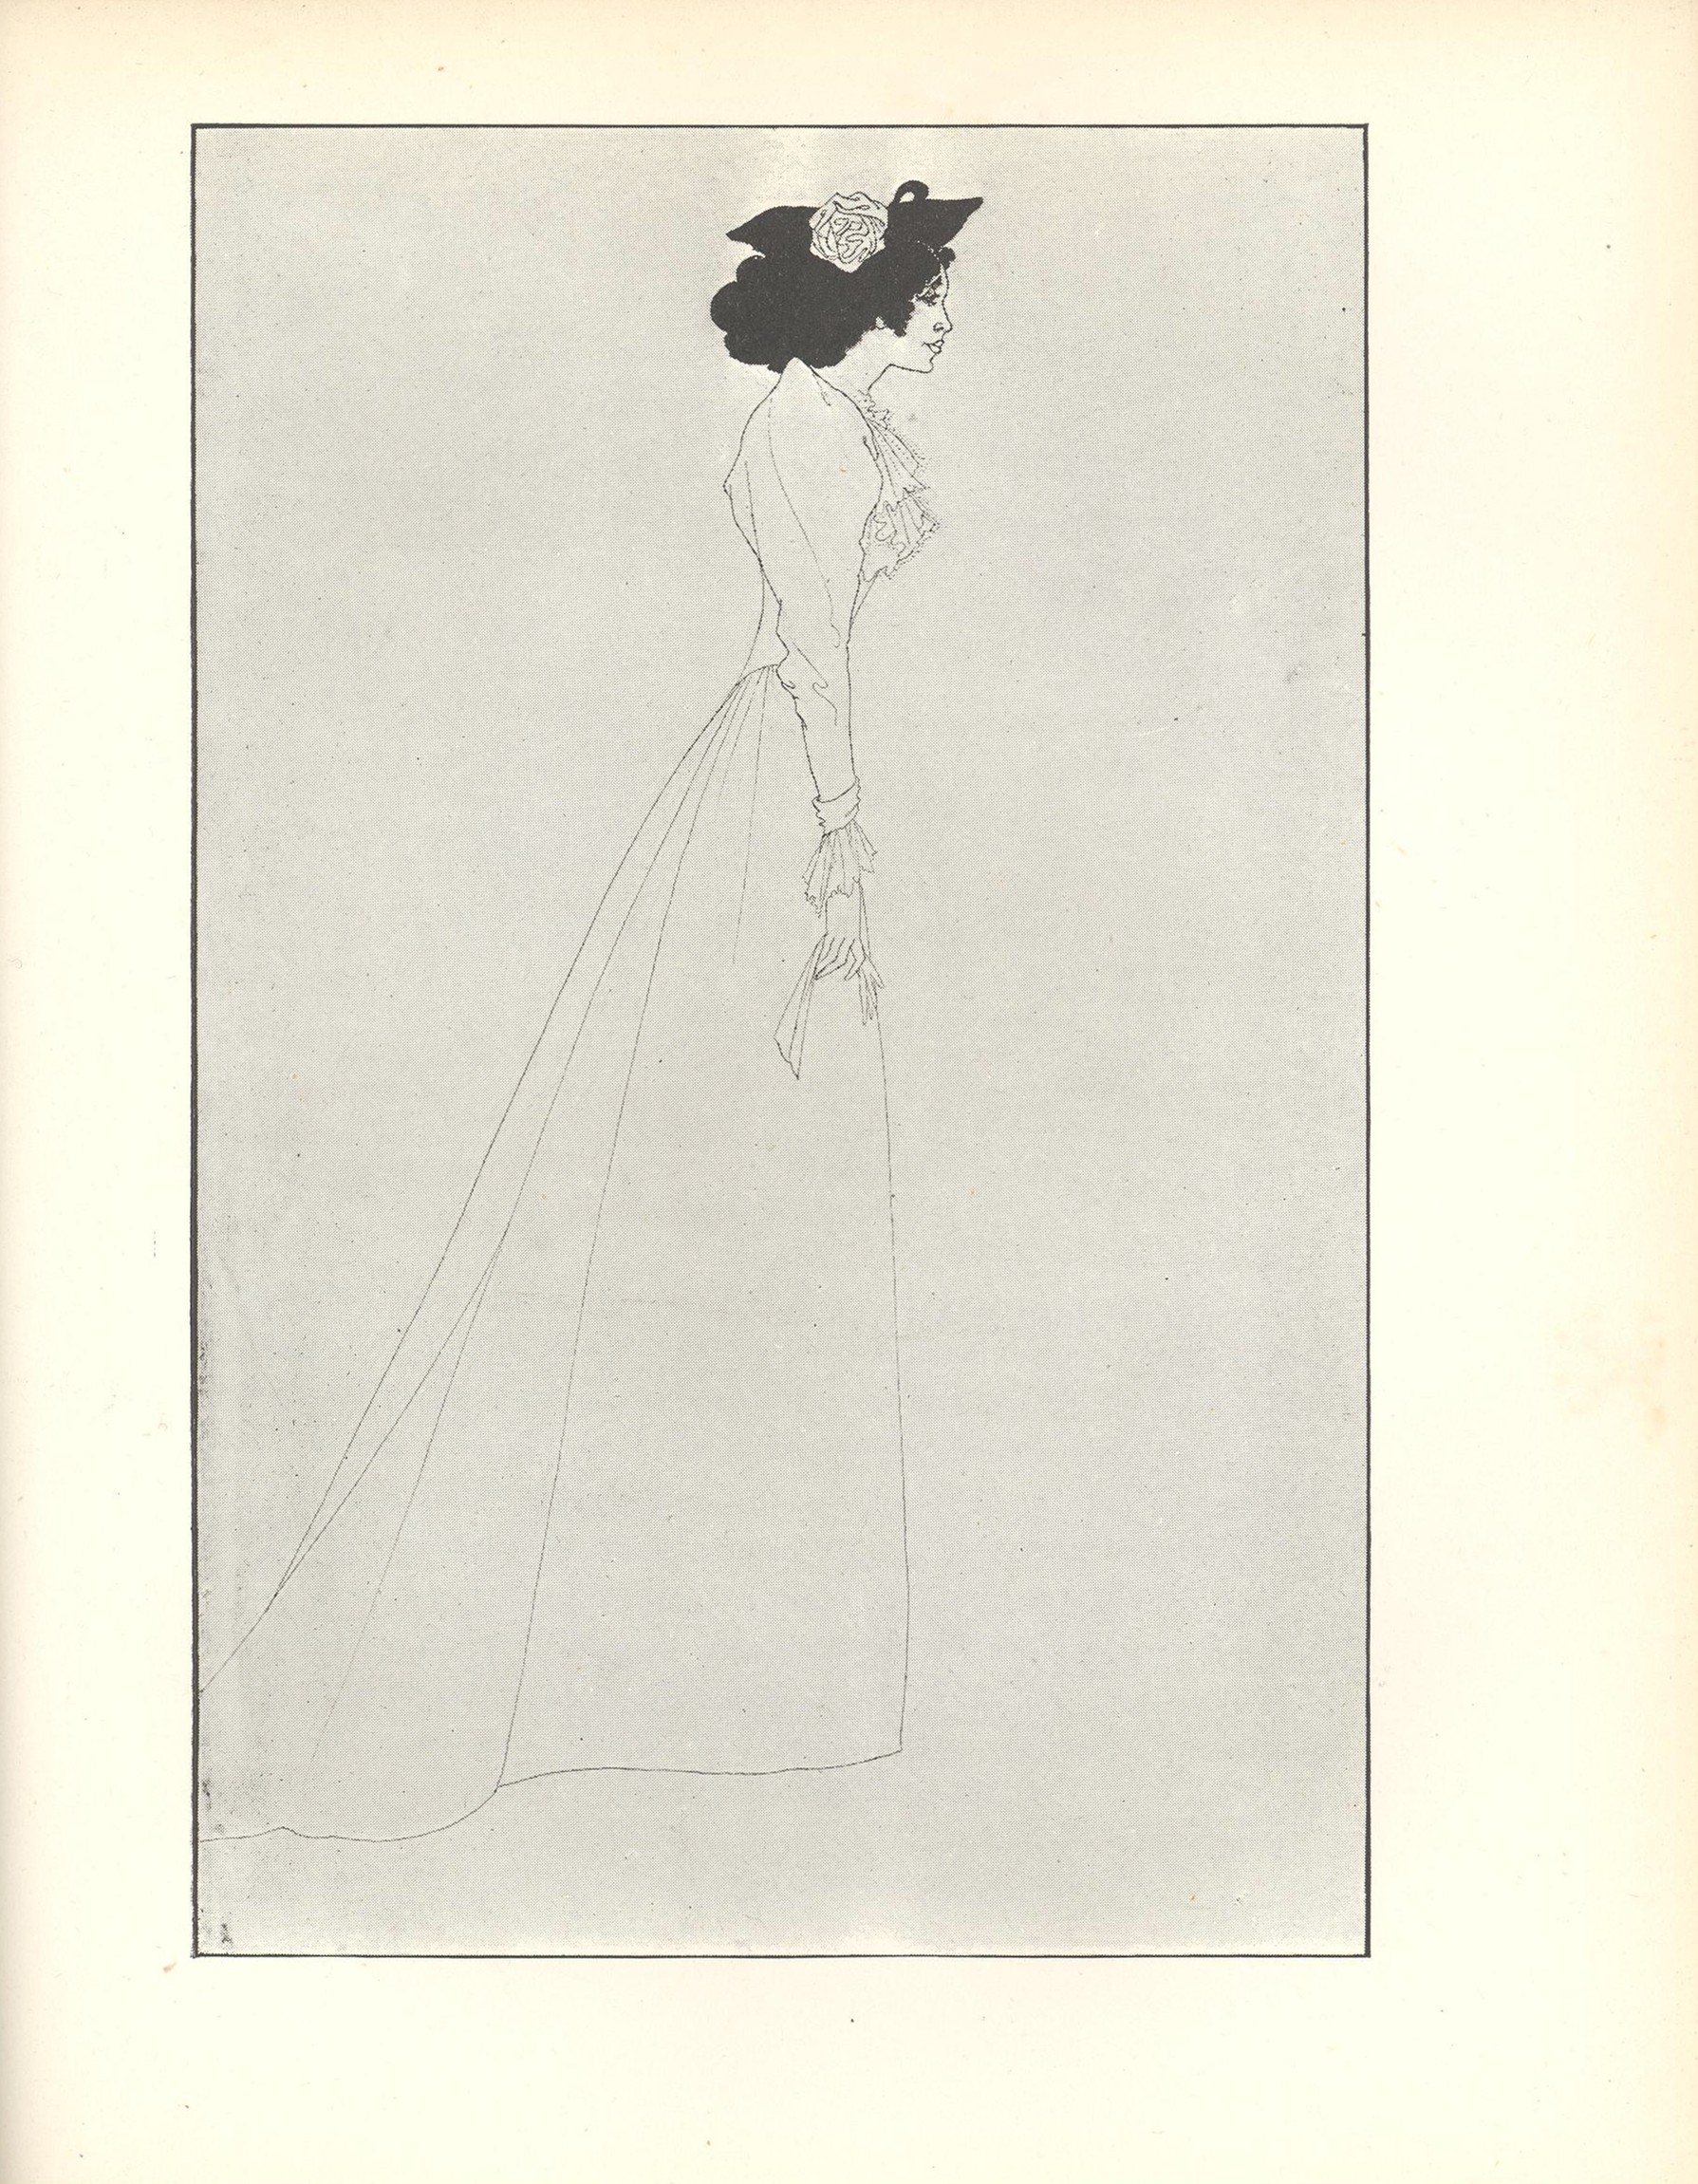 Image is of a full length woman standing in profile looking right Except for her black hair and hat her form is suggested with the lightest of lines Her body extends from nearly the top of the frame to the bottom dividing the space in half vertically She is wearing a small black hat with a large white rose a white dress with a lace jabot and puffed sleeves with lace cuffs She is carrying a white glove in her right hand The background is open and light coloured The image is vertically displayed